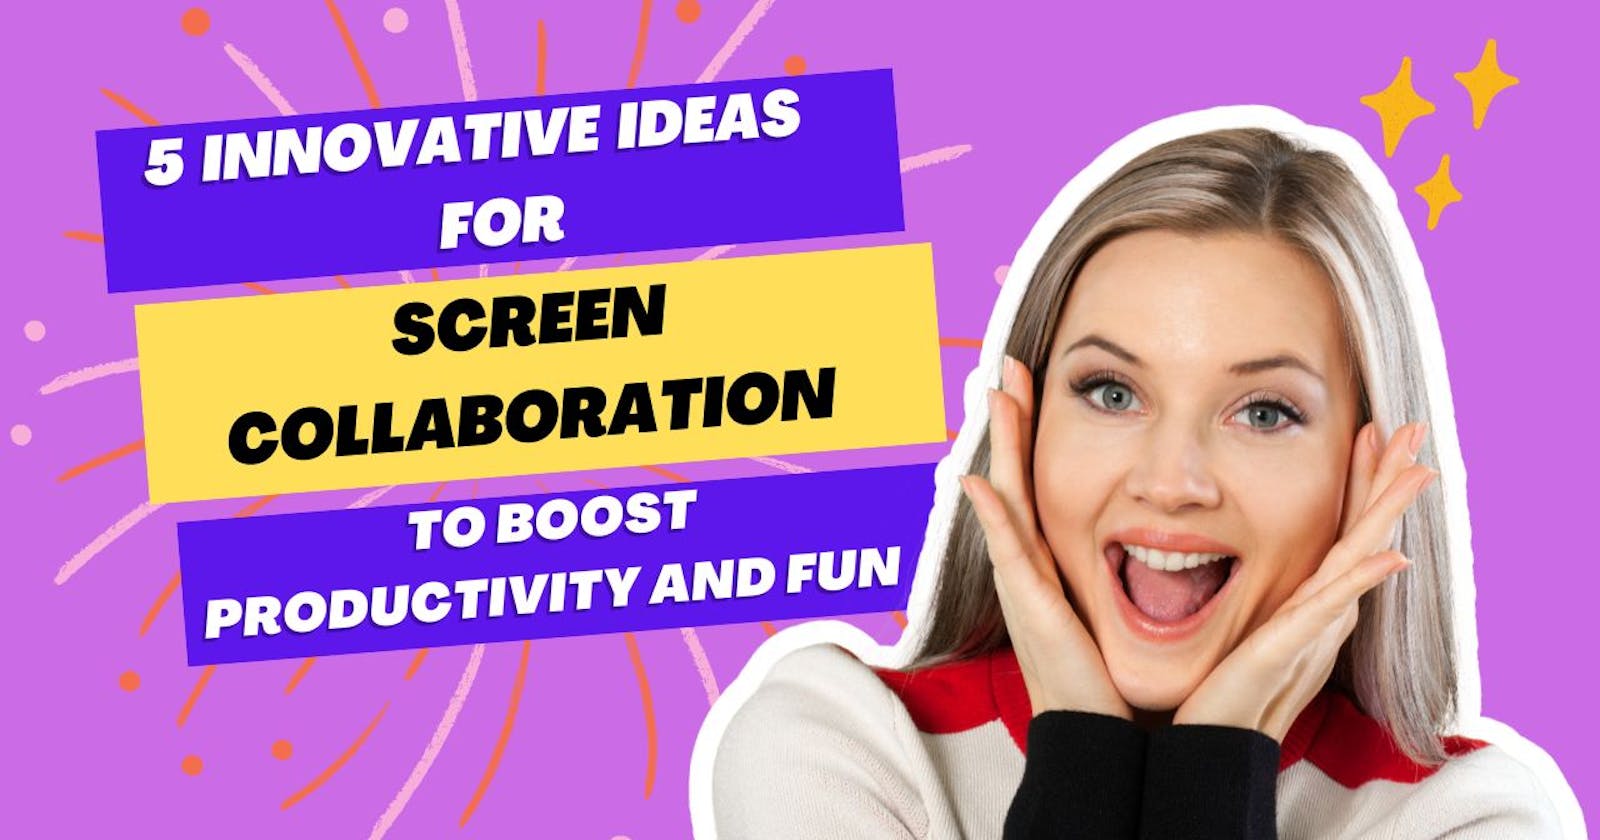 5 Innovative Ideas for Screen Collaboration to Boost Productivity and Fun